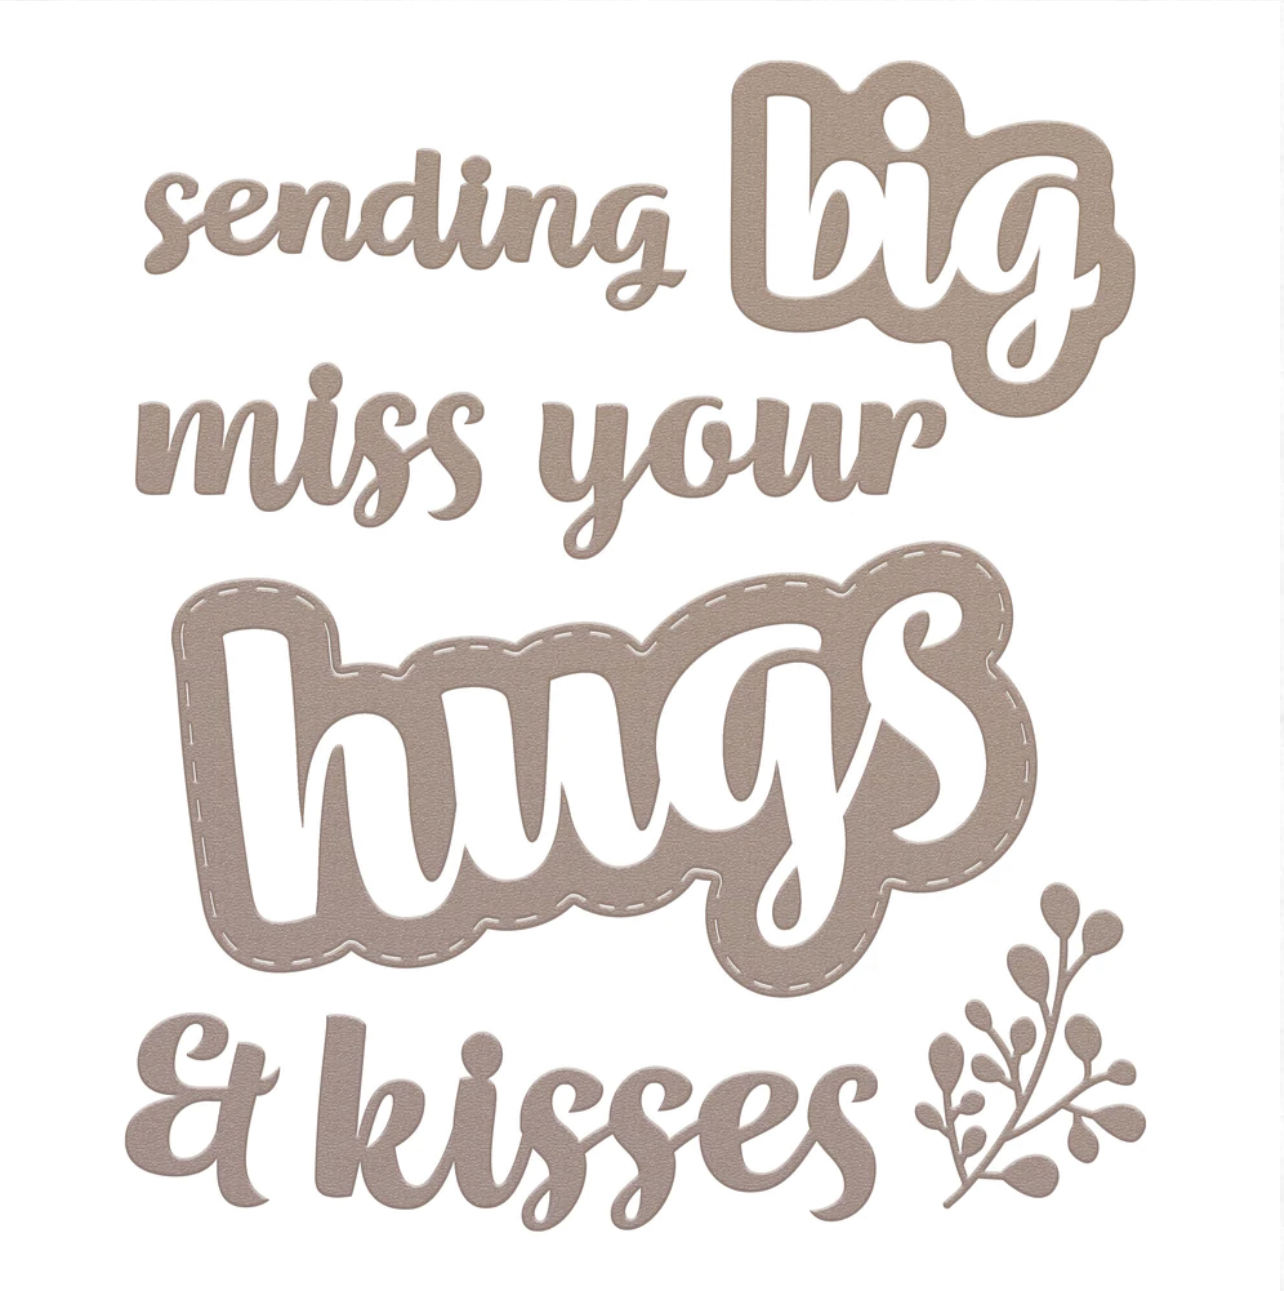 Couture Creations Dies Homely Florals - Hugs Sentiment Set